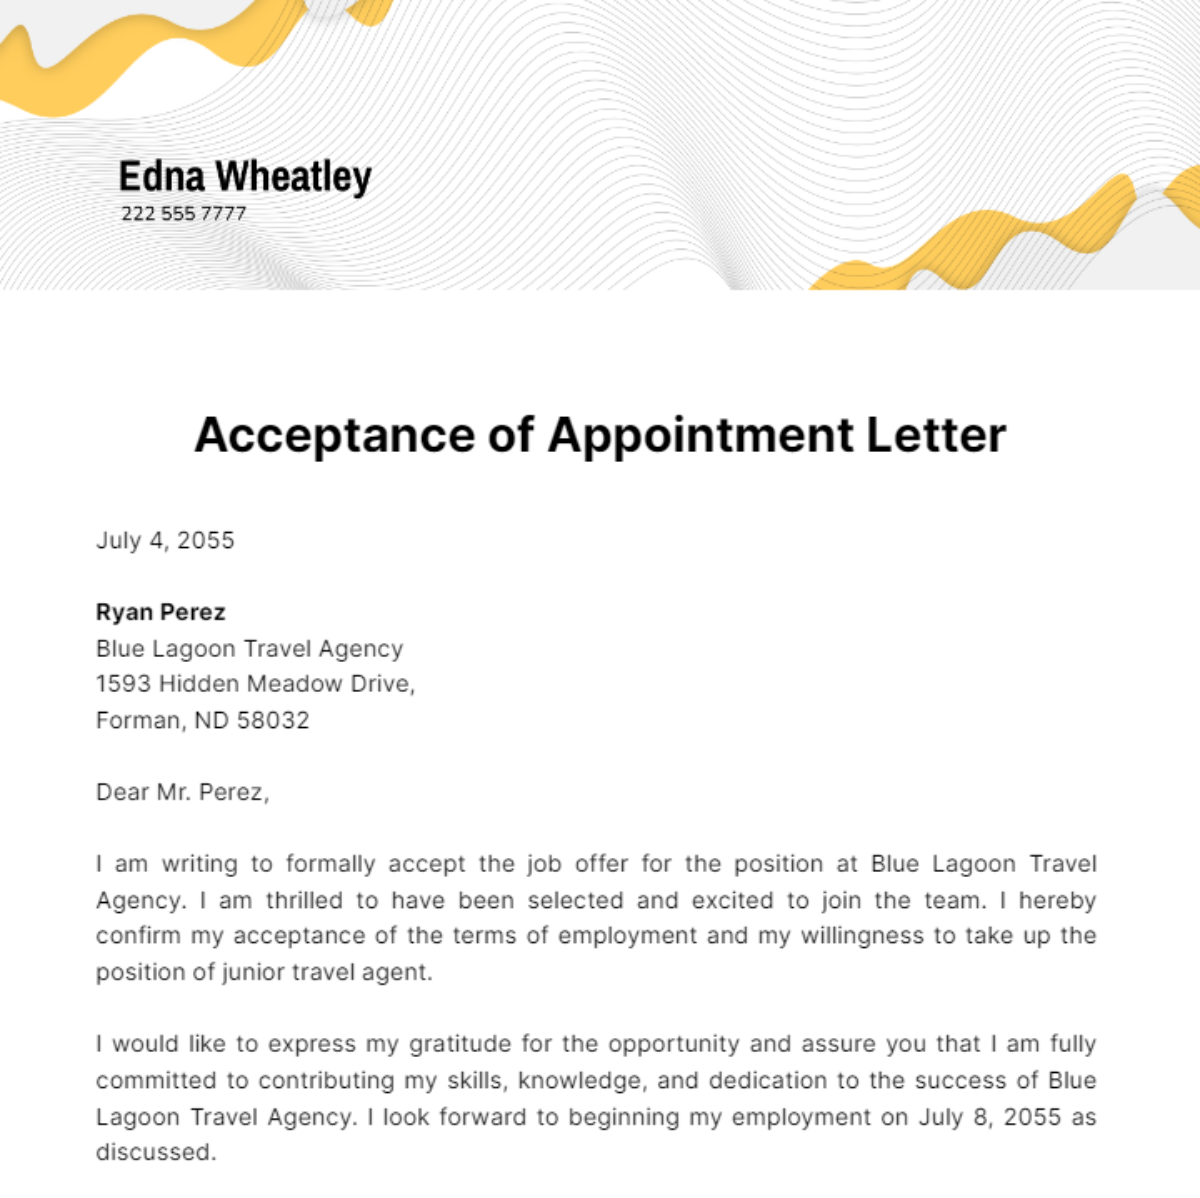 Acceptance of Appointment Letter Template